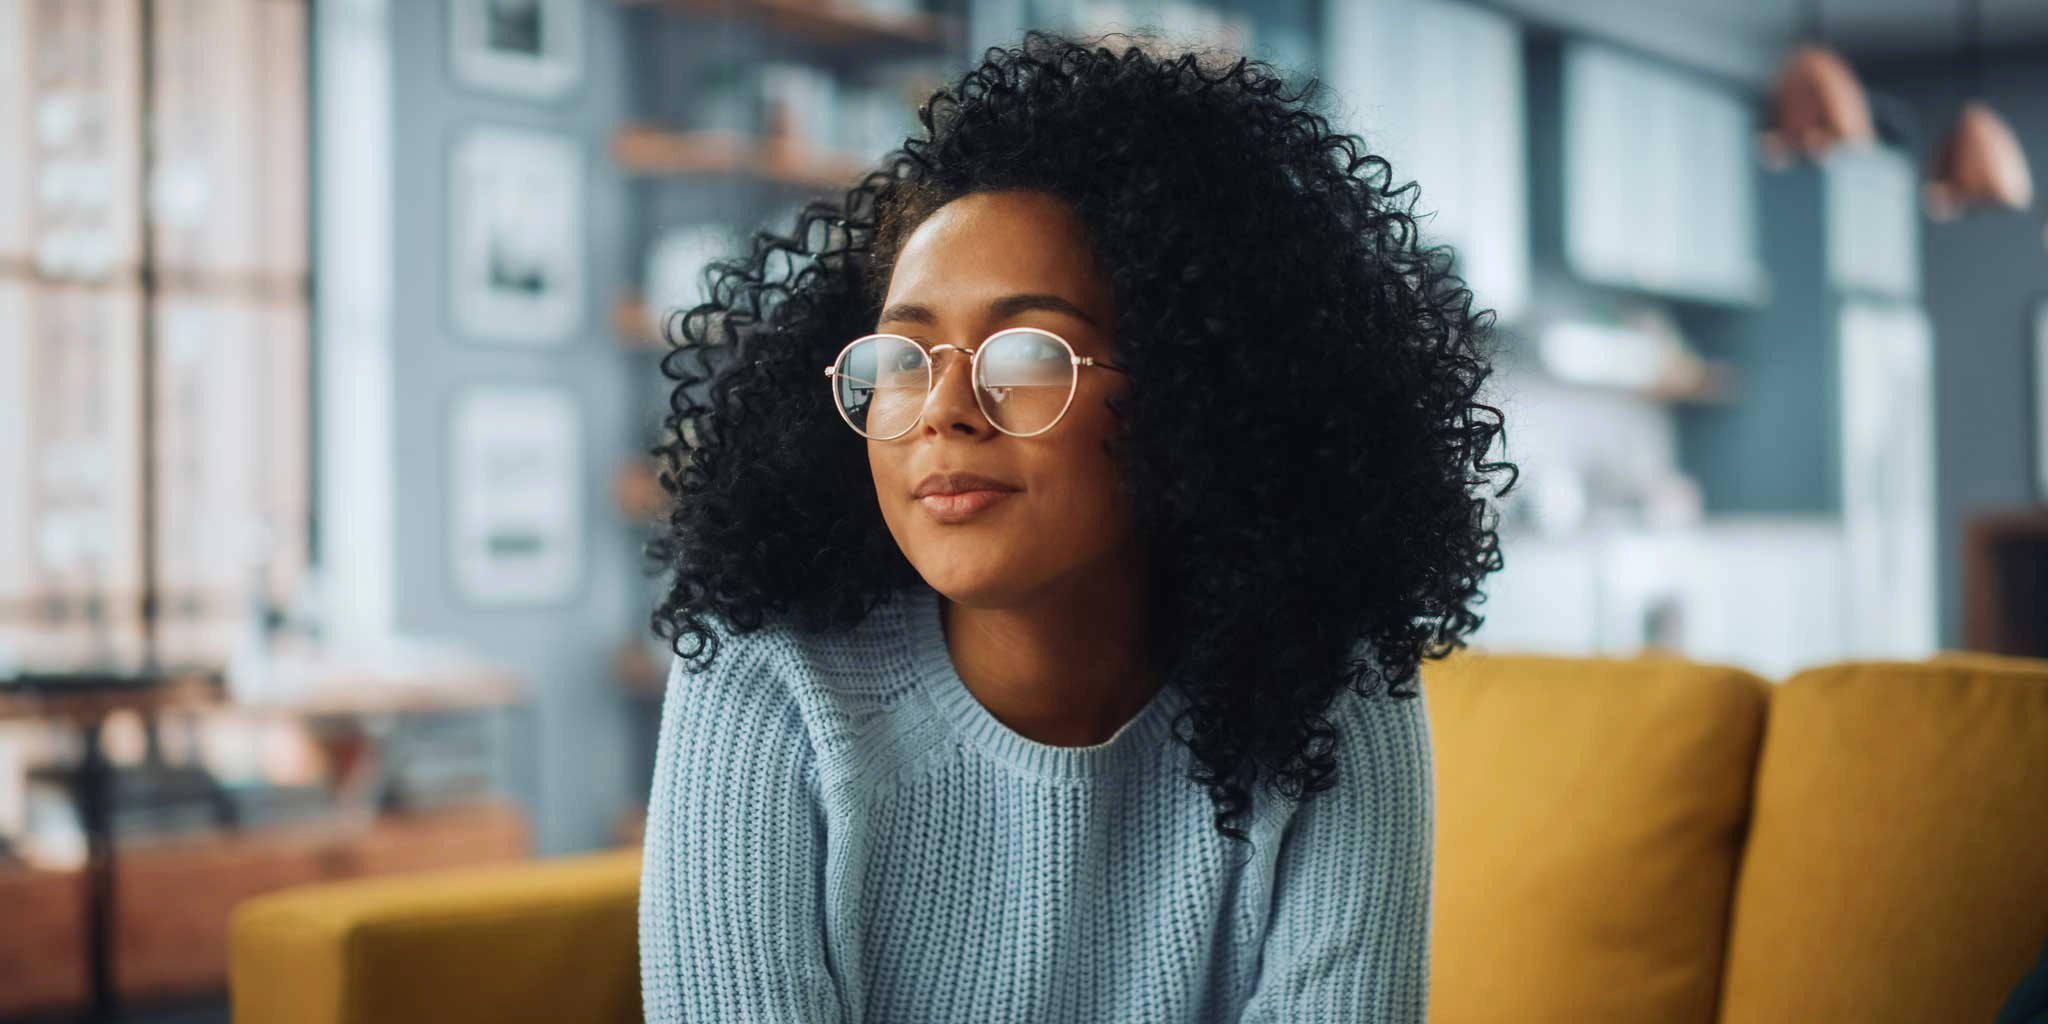 Portrait of a Beautiful Authentic Latina Female with Afro Hair Wearing Light Blue Jumper and Glasses. She Looks Away and Thinking about Life. Successful Woman Resting in Bright Living Room.